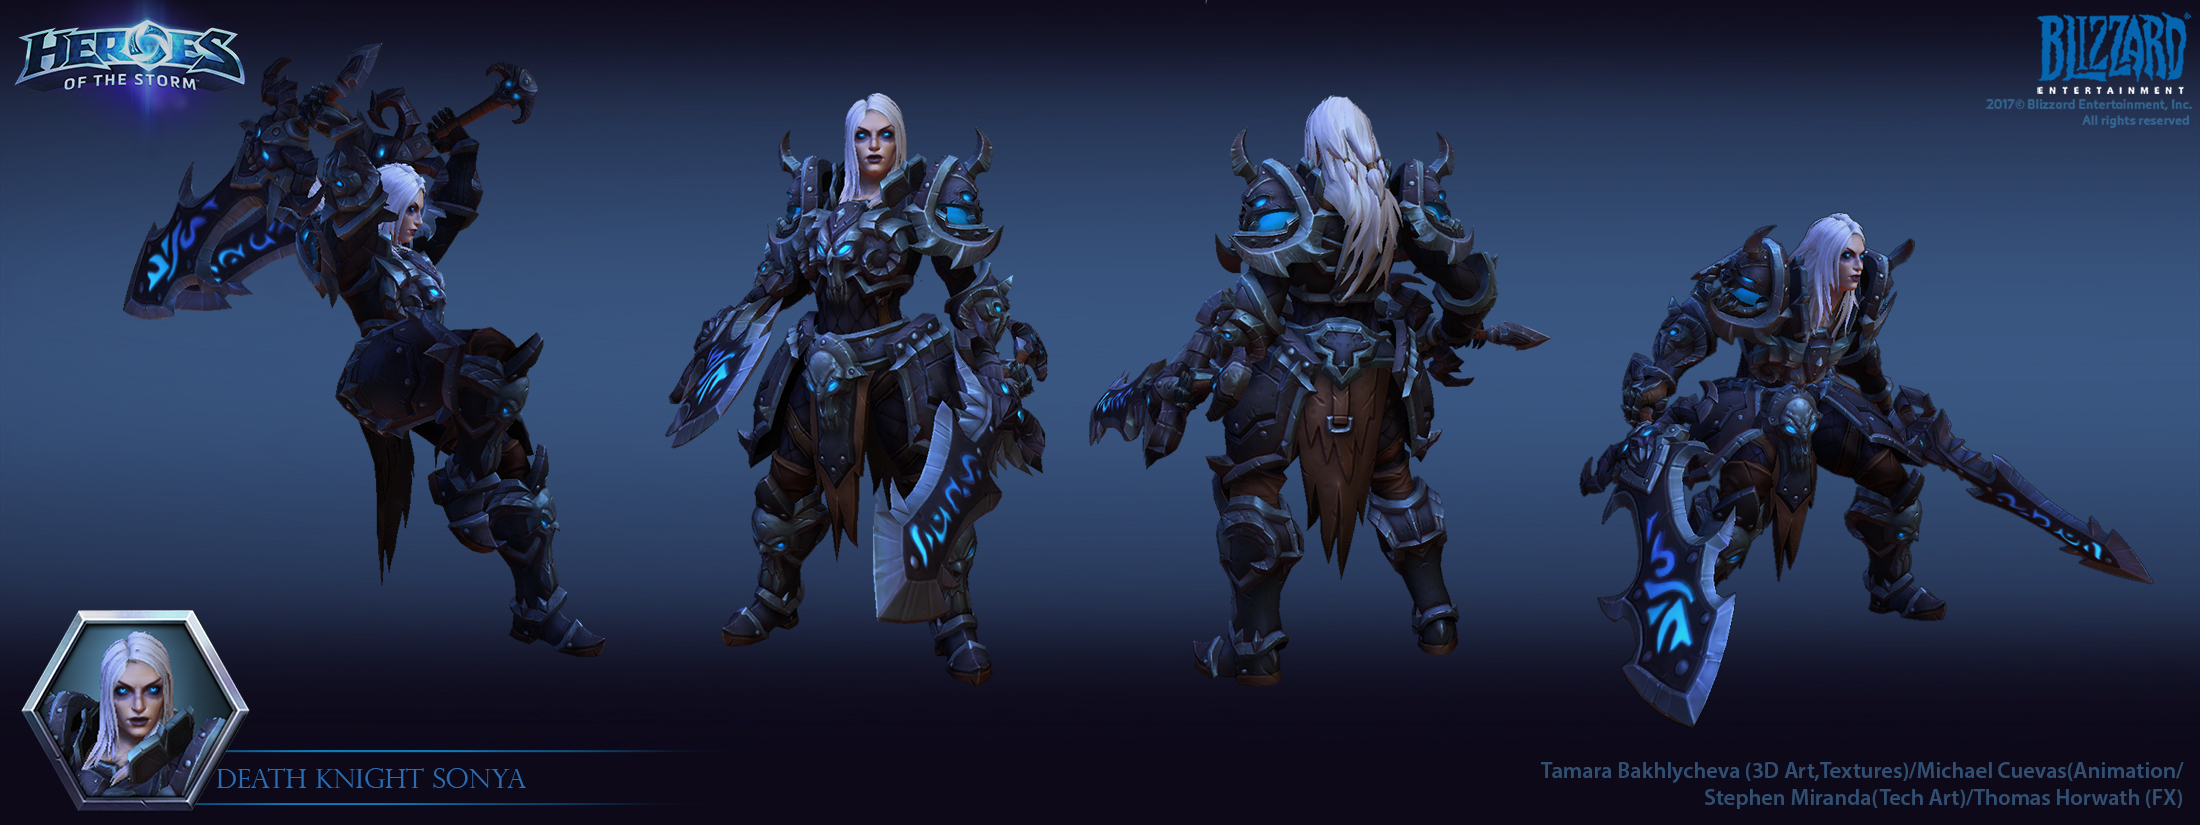 Sylvanas ranger Heroes of the Storm by FirstKeeper on DeviantArt